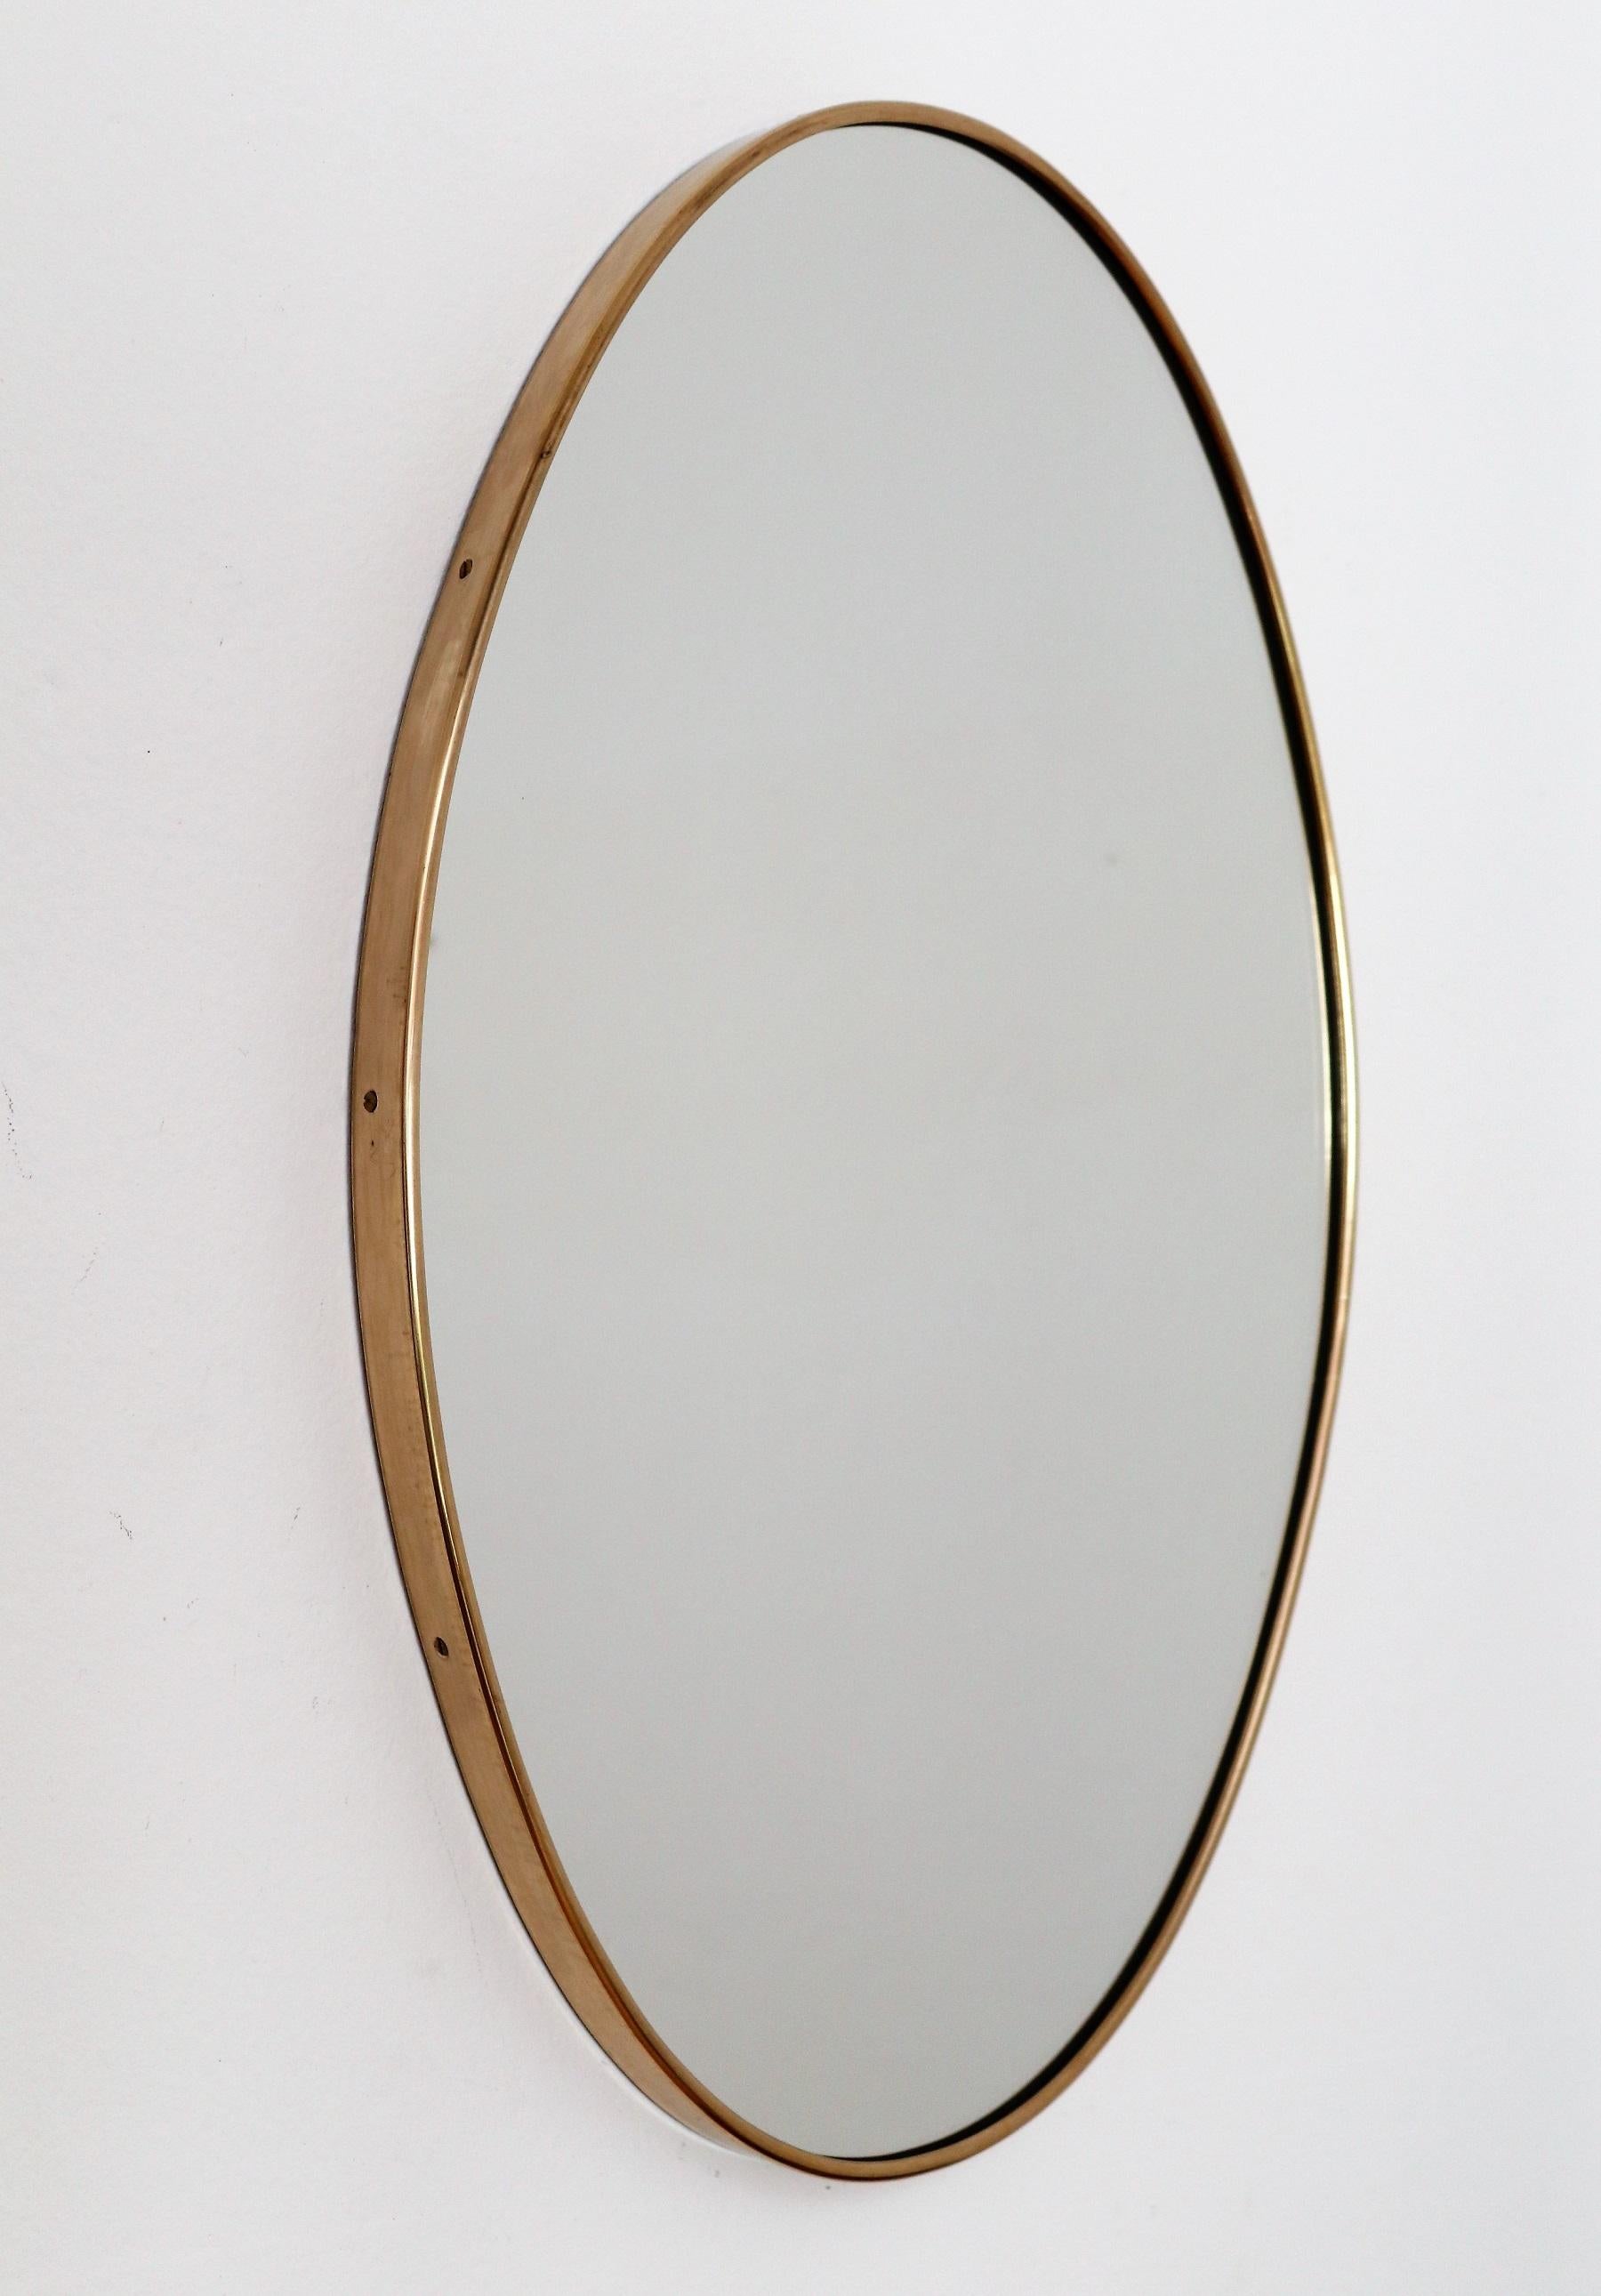 Beautiful and original oval wall mirror with brass frame from Italian production of the 1960s.
The crystal glass is in original very good condition, no defects, only a few light spots.
The mirror is equipped with strong wooden back plate and hook